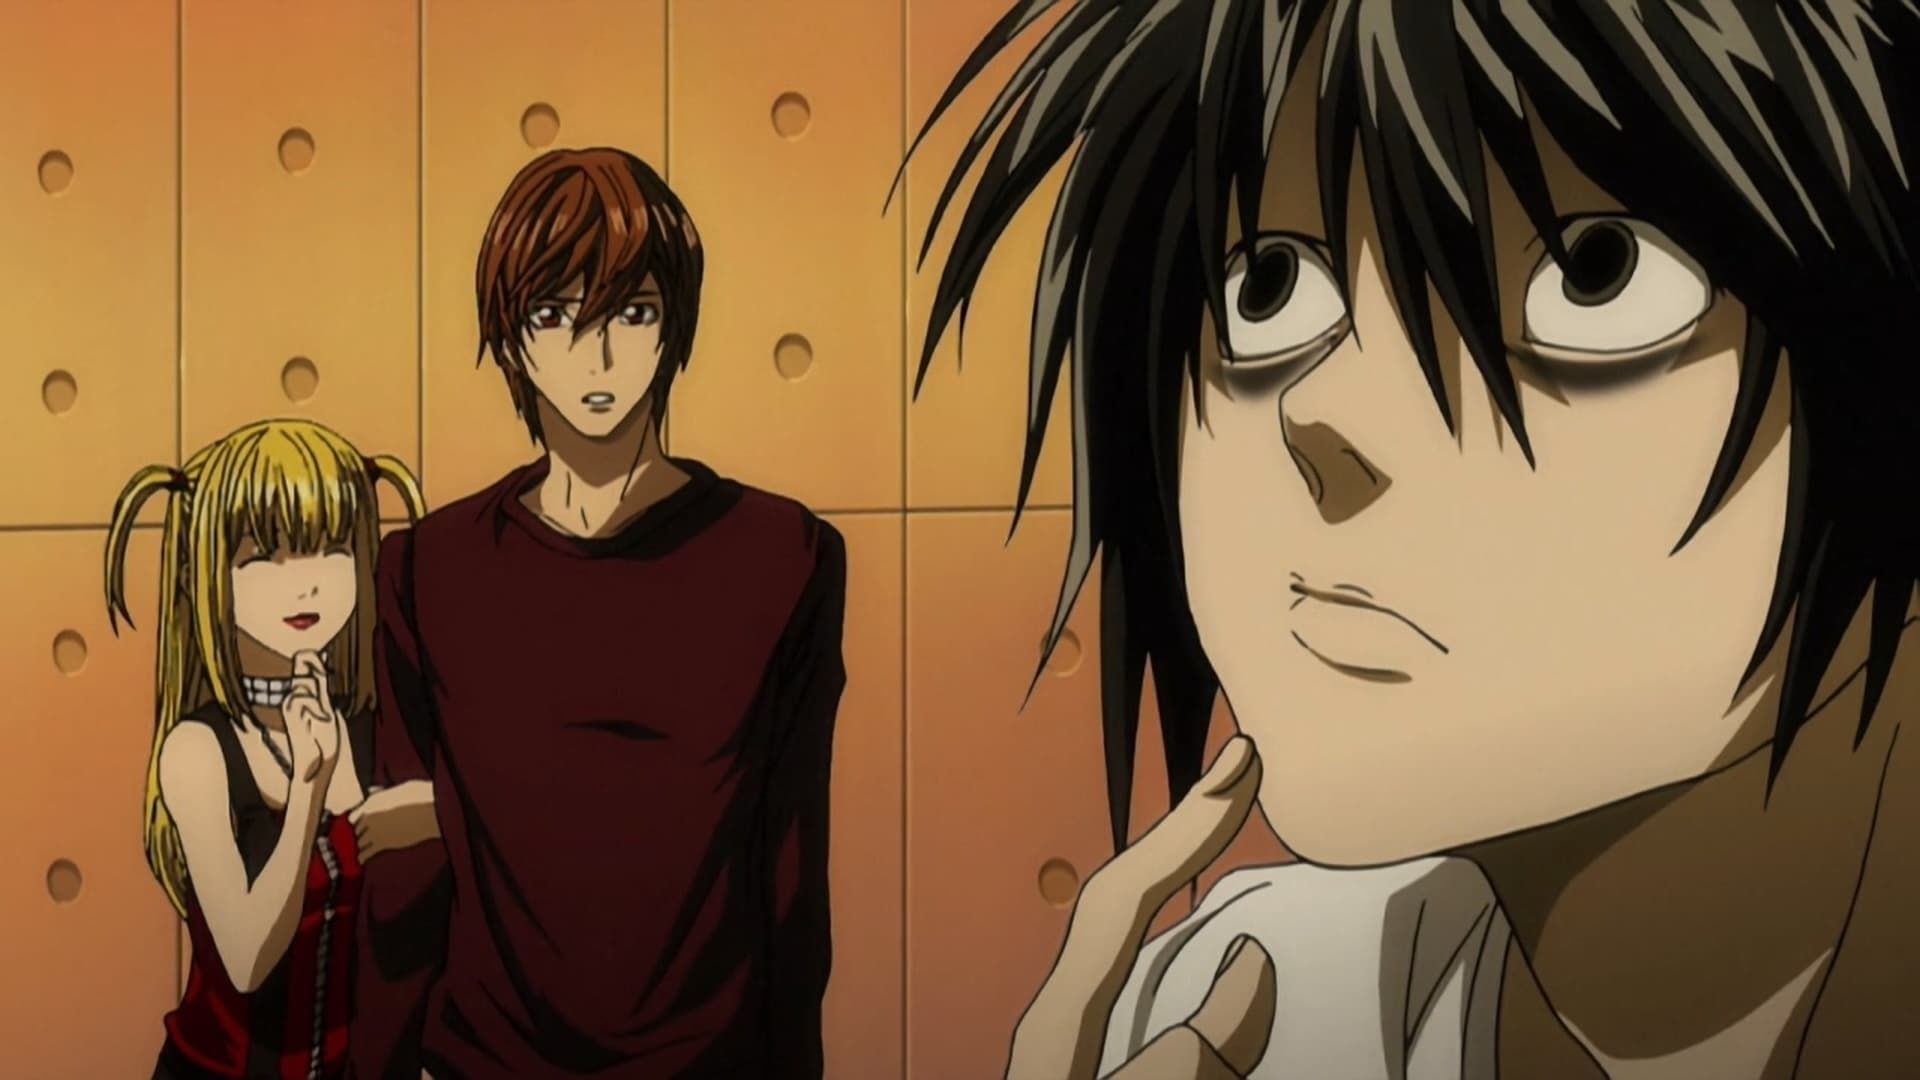 How to Watch Death Note Online (from Anywhere)